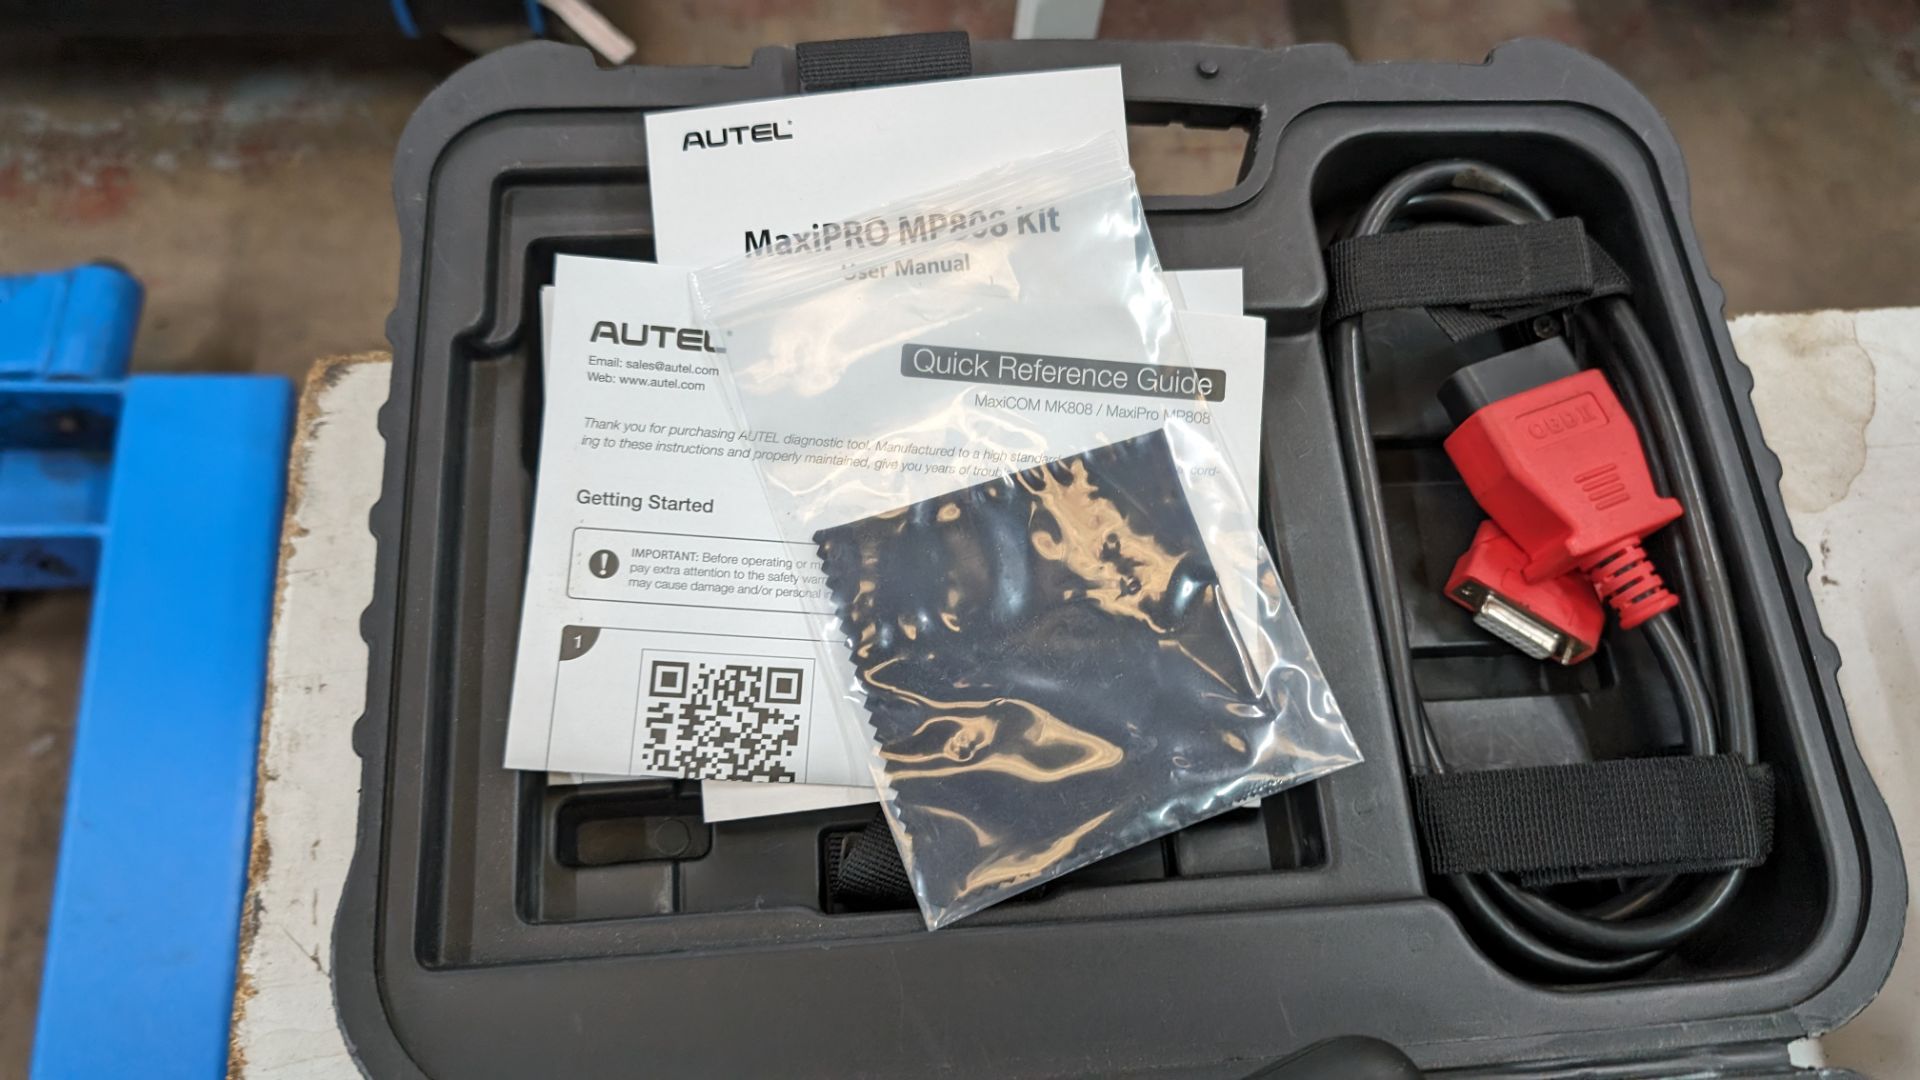 Autel MaxiPRO model MP808 touchscreen diagnostics device including case, cables & book pack - Image 5 of 11